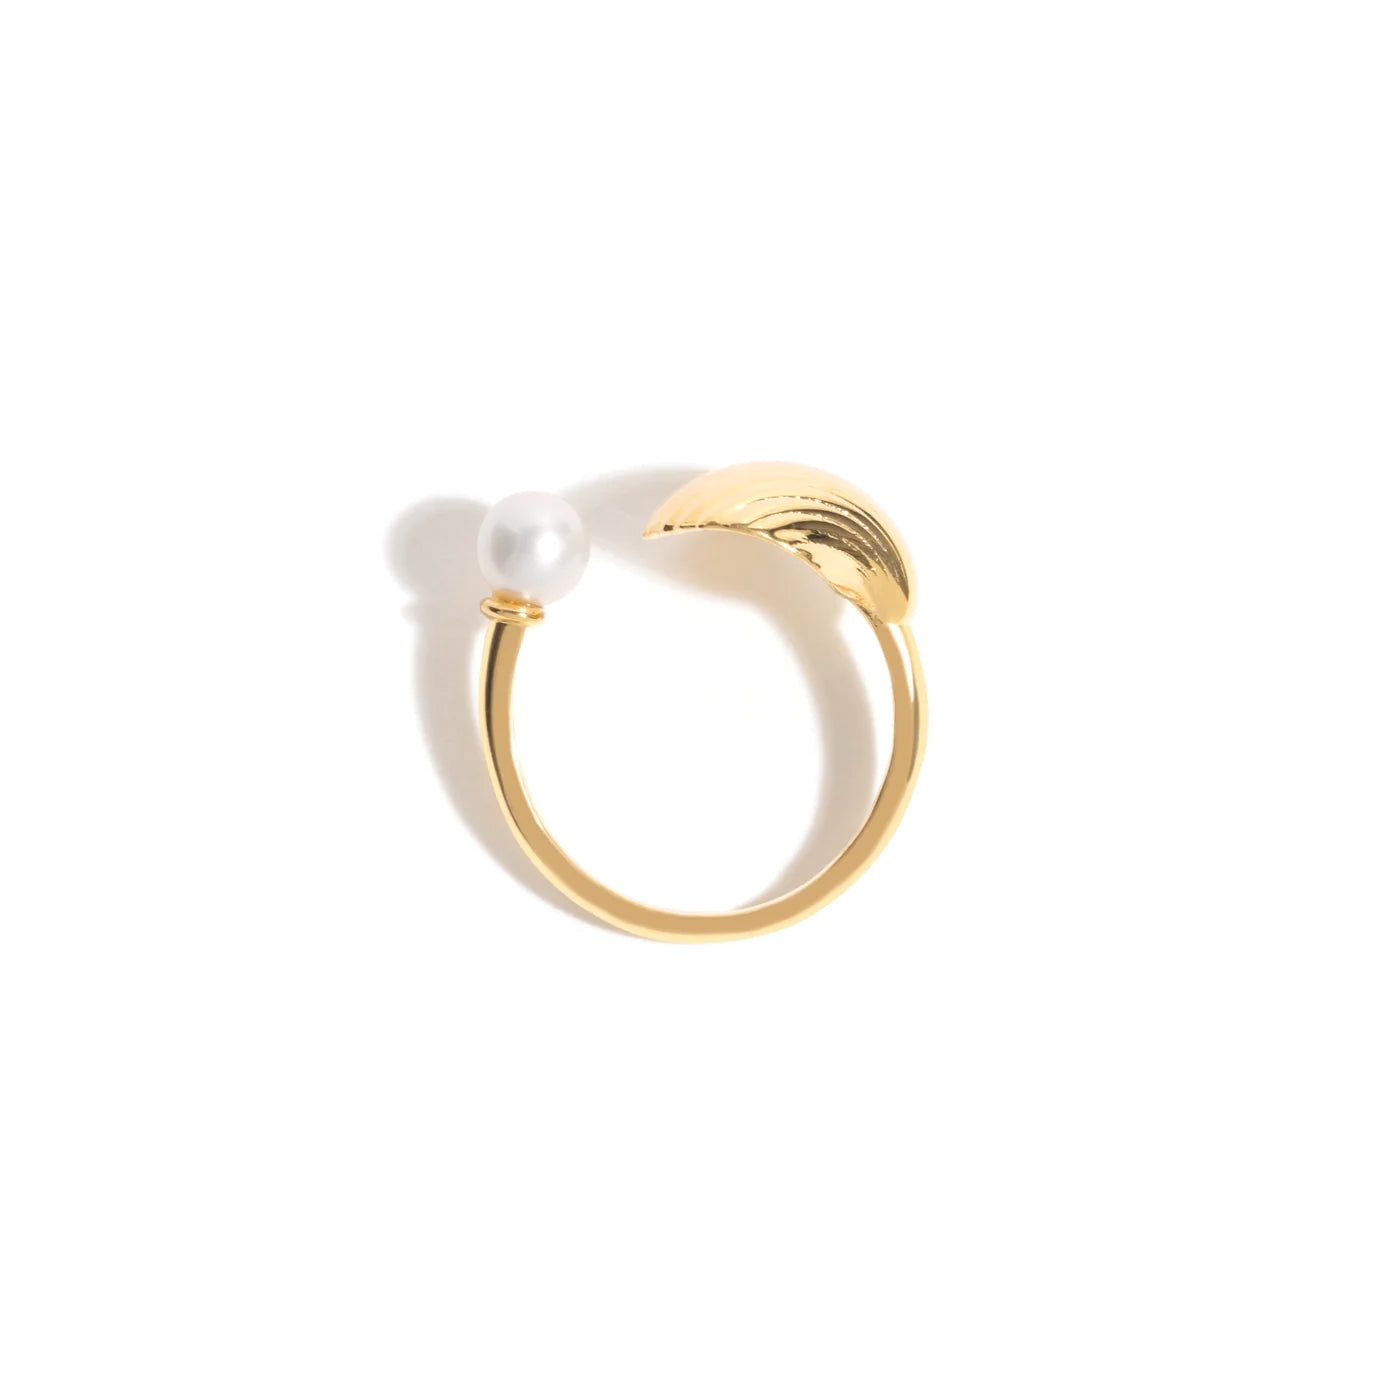 PERLA RING IN 18K YELLOW GOLD PLATED SILVER WITH PEARL